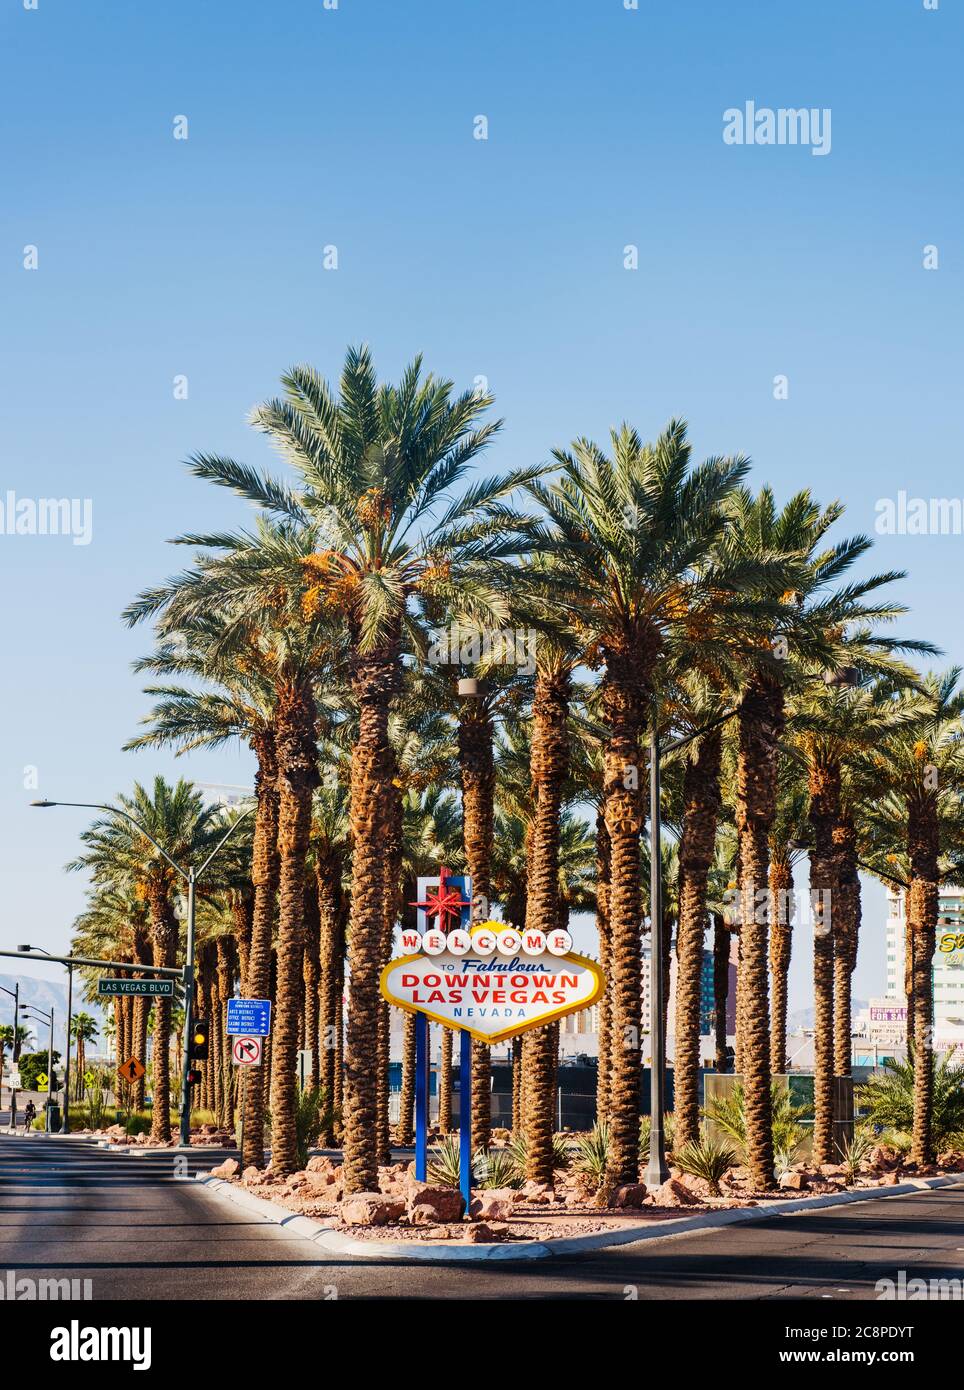 welcome to fabulous las vegas sign in front of palm trees, Las Vegas, Nevada Stock Photo